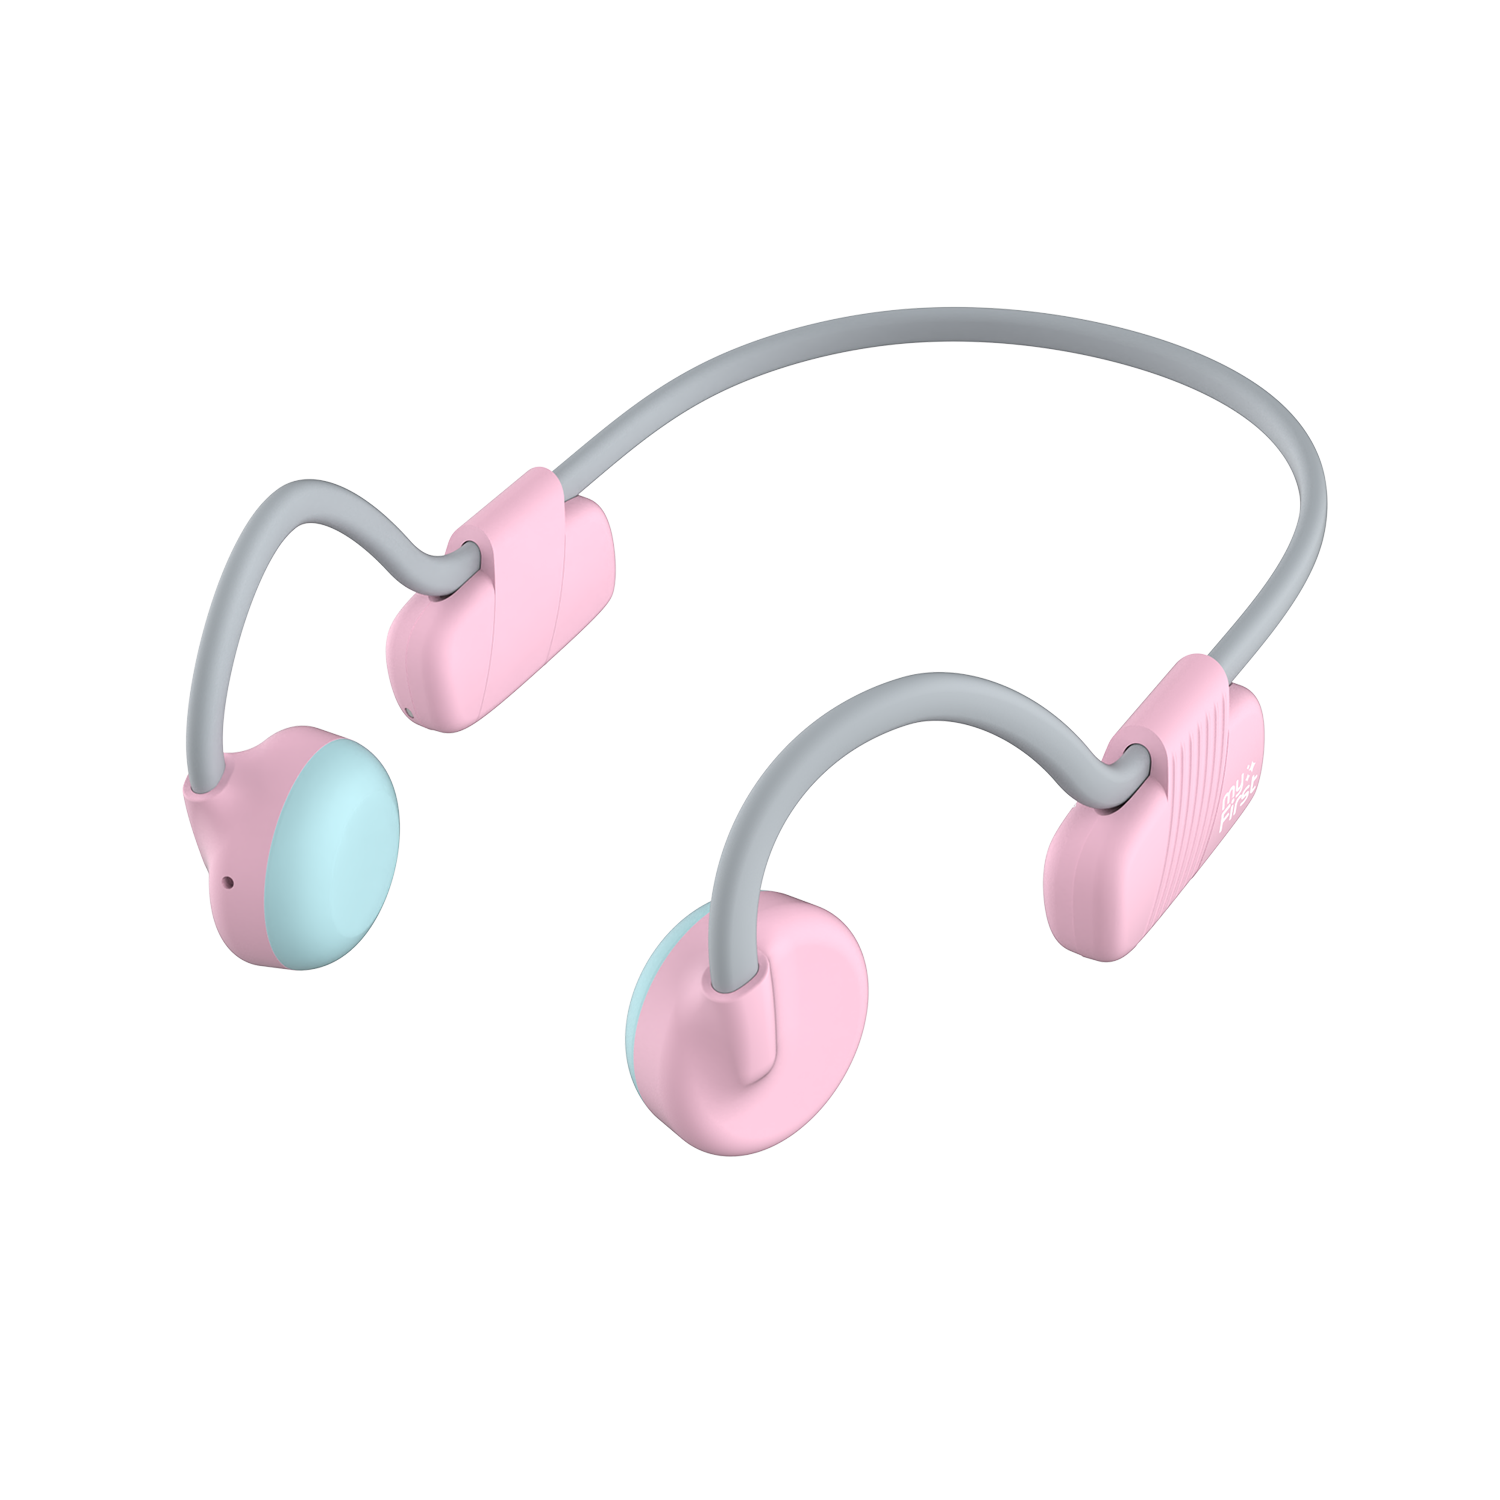 myFirst Headphones BC Wireless Lite - Oaxis - The Official Maker of InkCase and the brand owner of myFirst - A brand new collection for kids